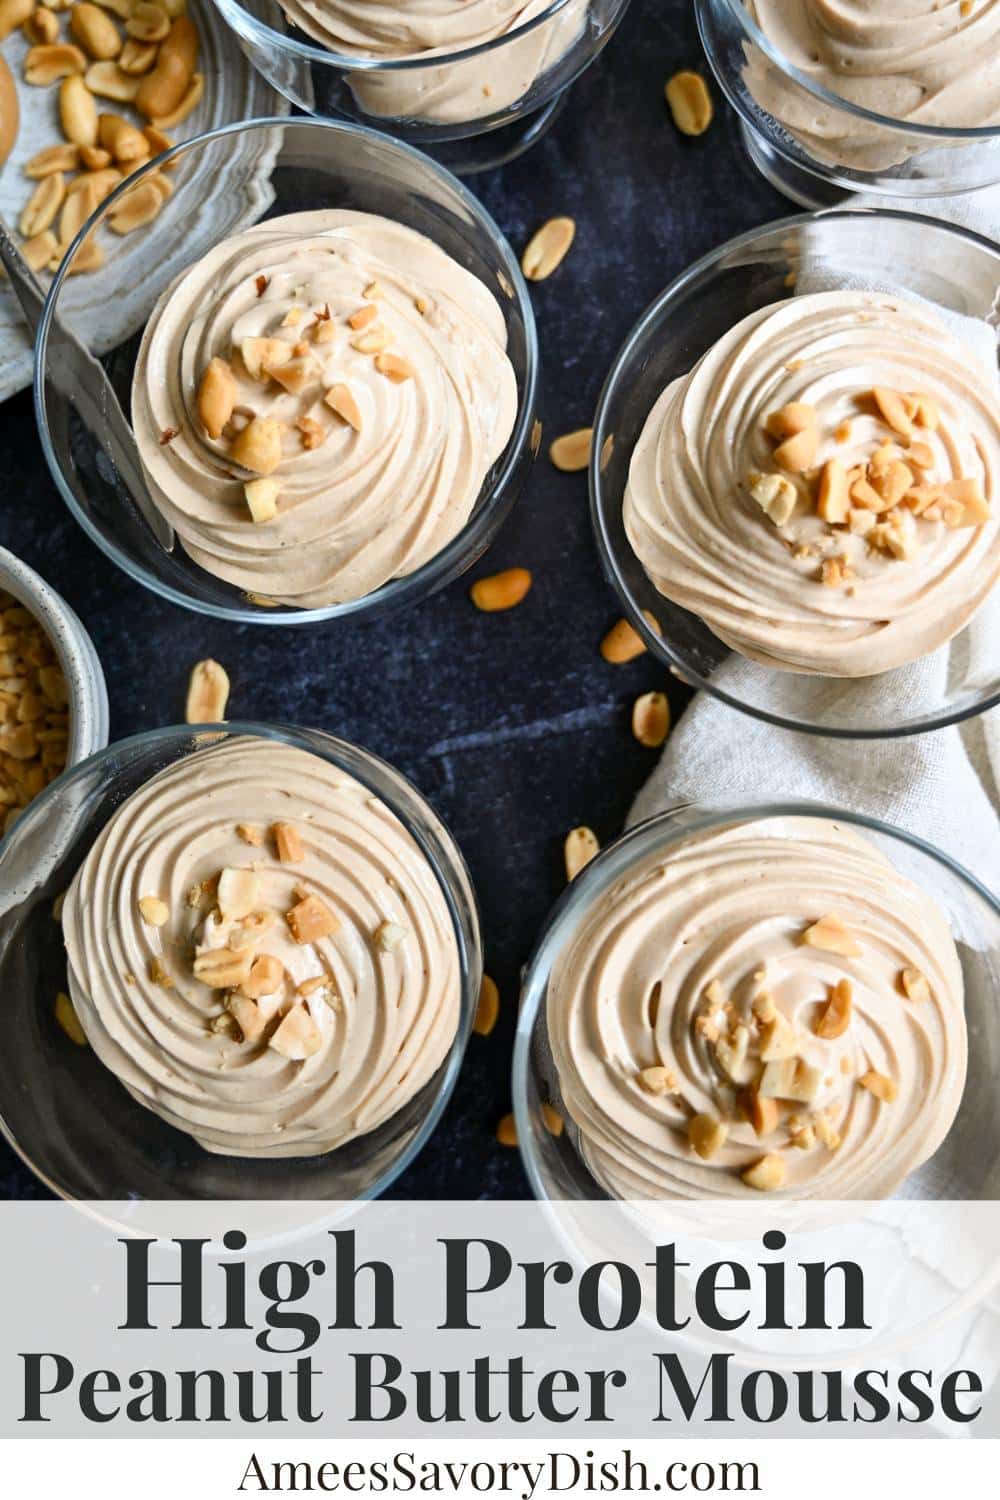 This light and easy recipe for Peanut Butter Mousse combines creamy peanut butter, Greek yogurt, powdered peanut butter, maple syrup, and fluffy whipped topping for a delicious dessert that's ready in minutes. via @Ameessavorydish